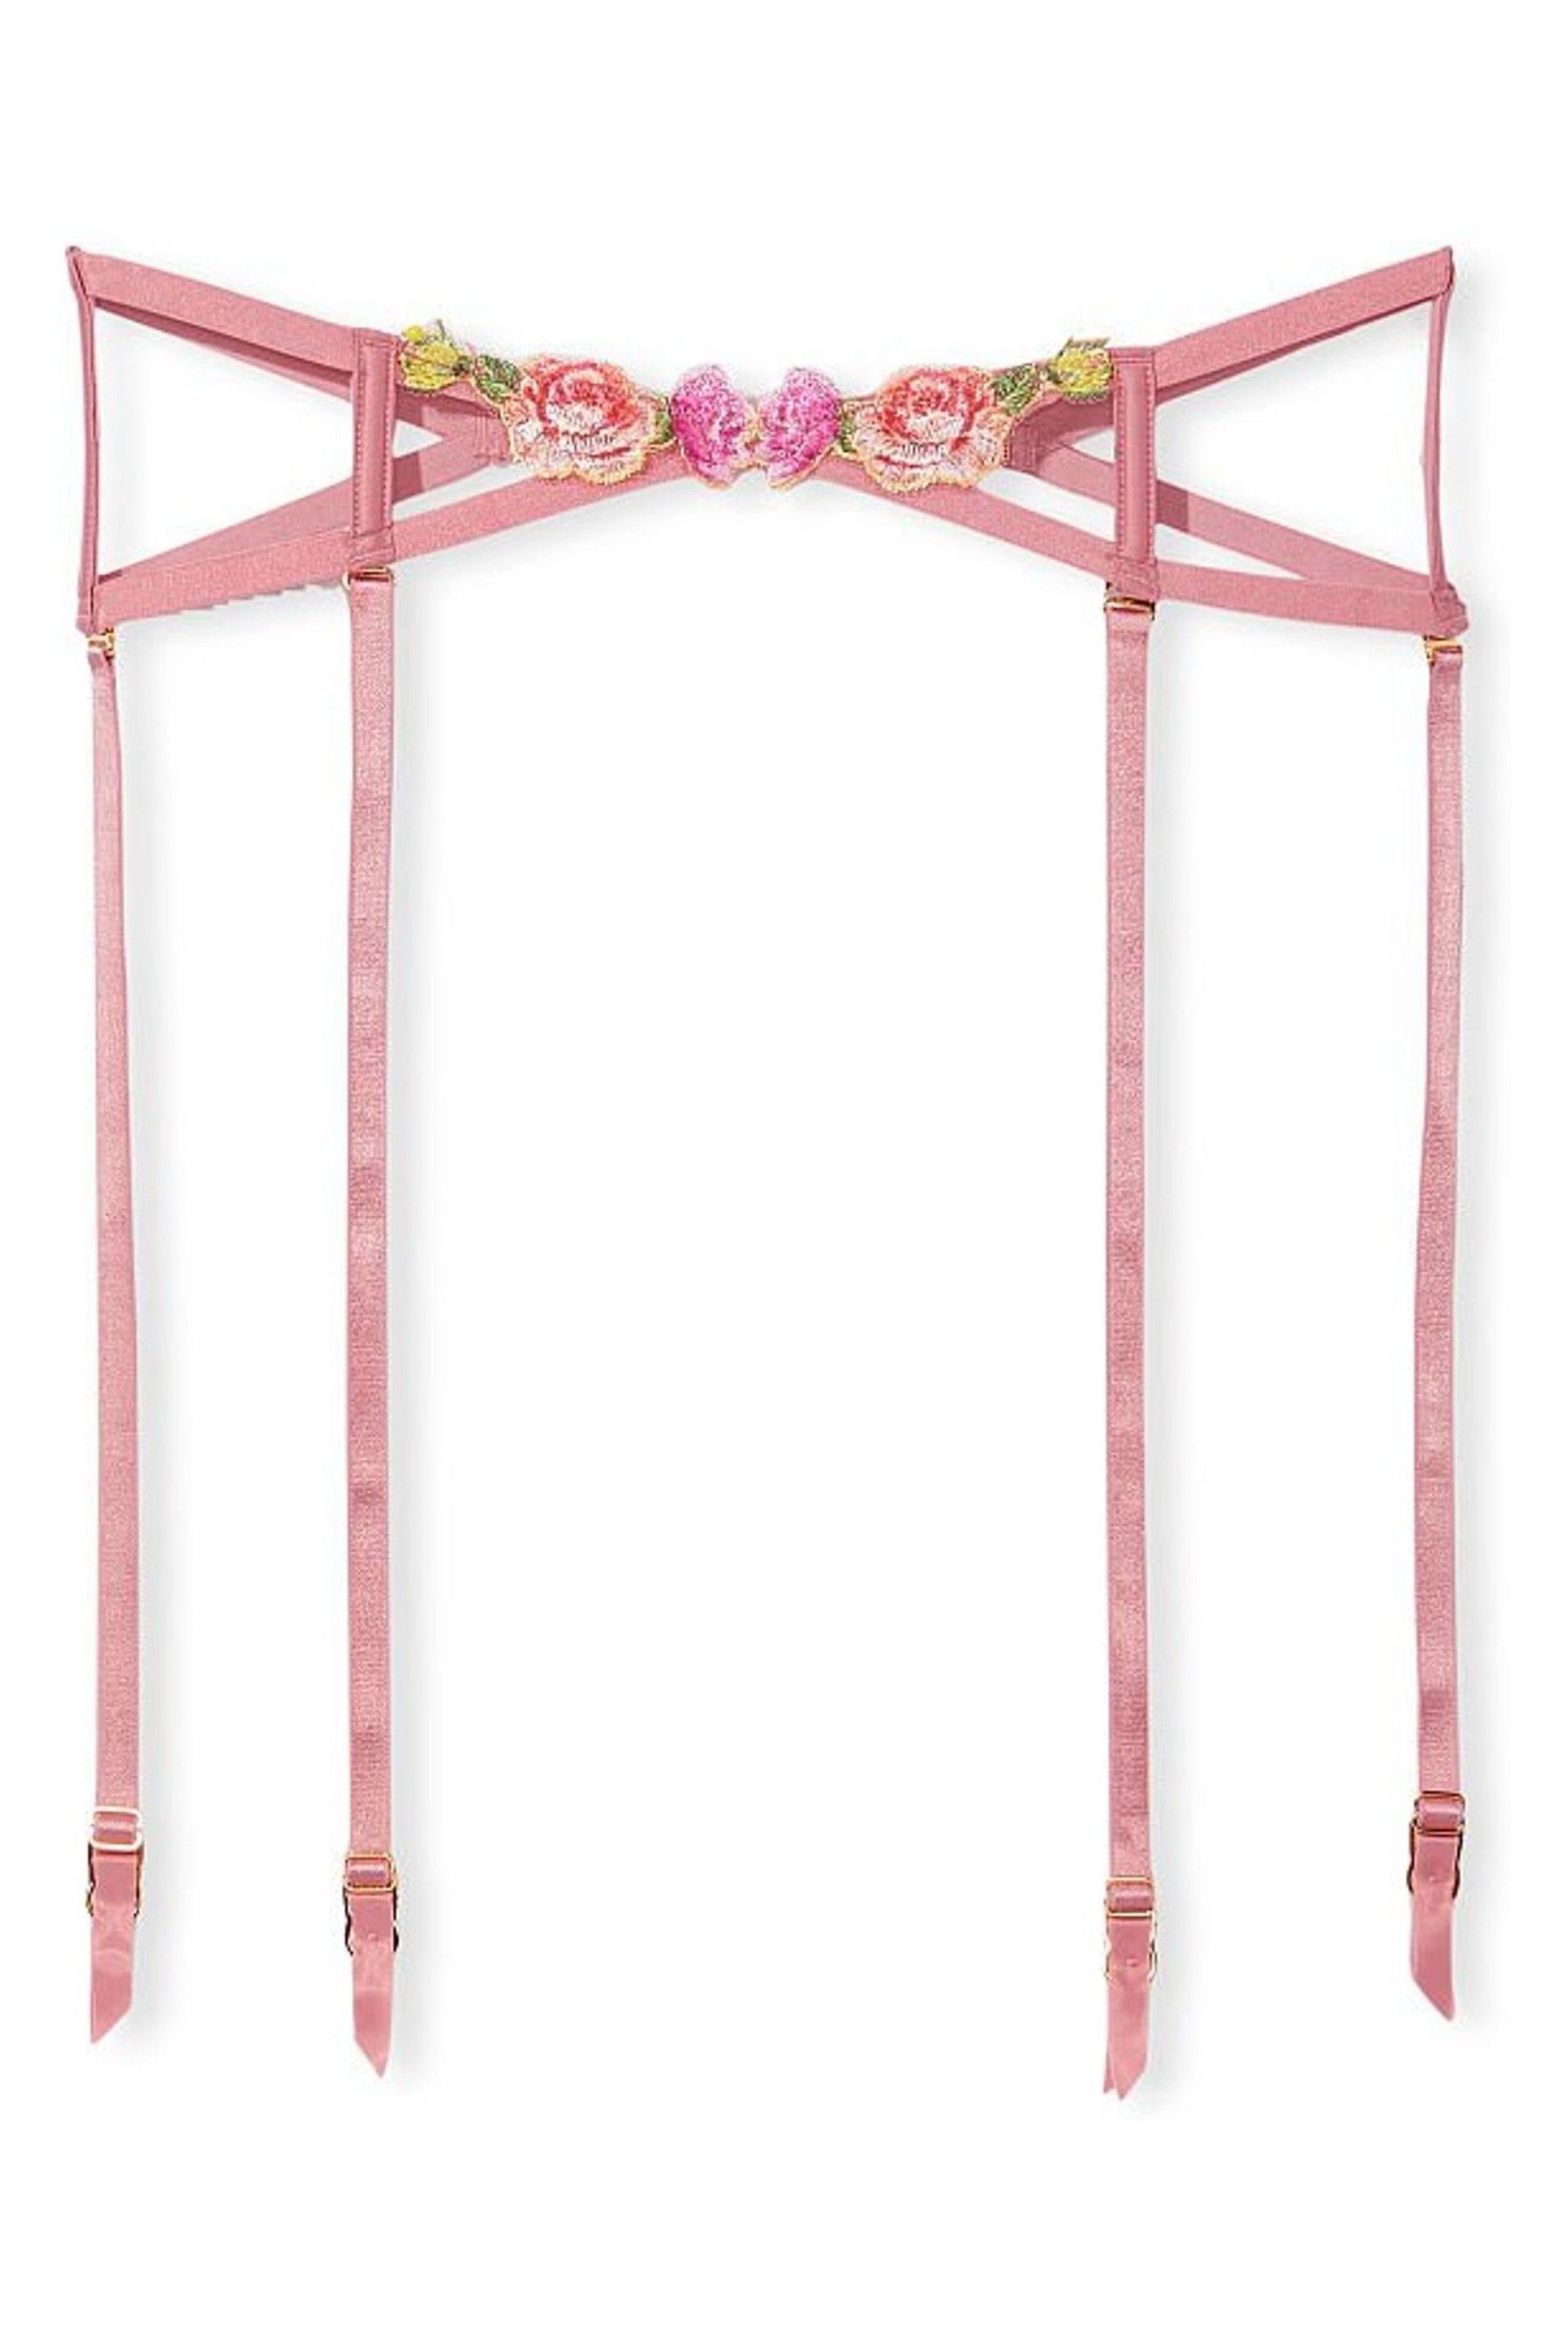 Buy Victoria's Secret Rose Embroidered Garter Belt from the Victoria's ...